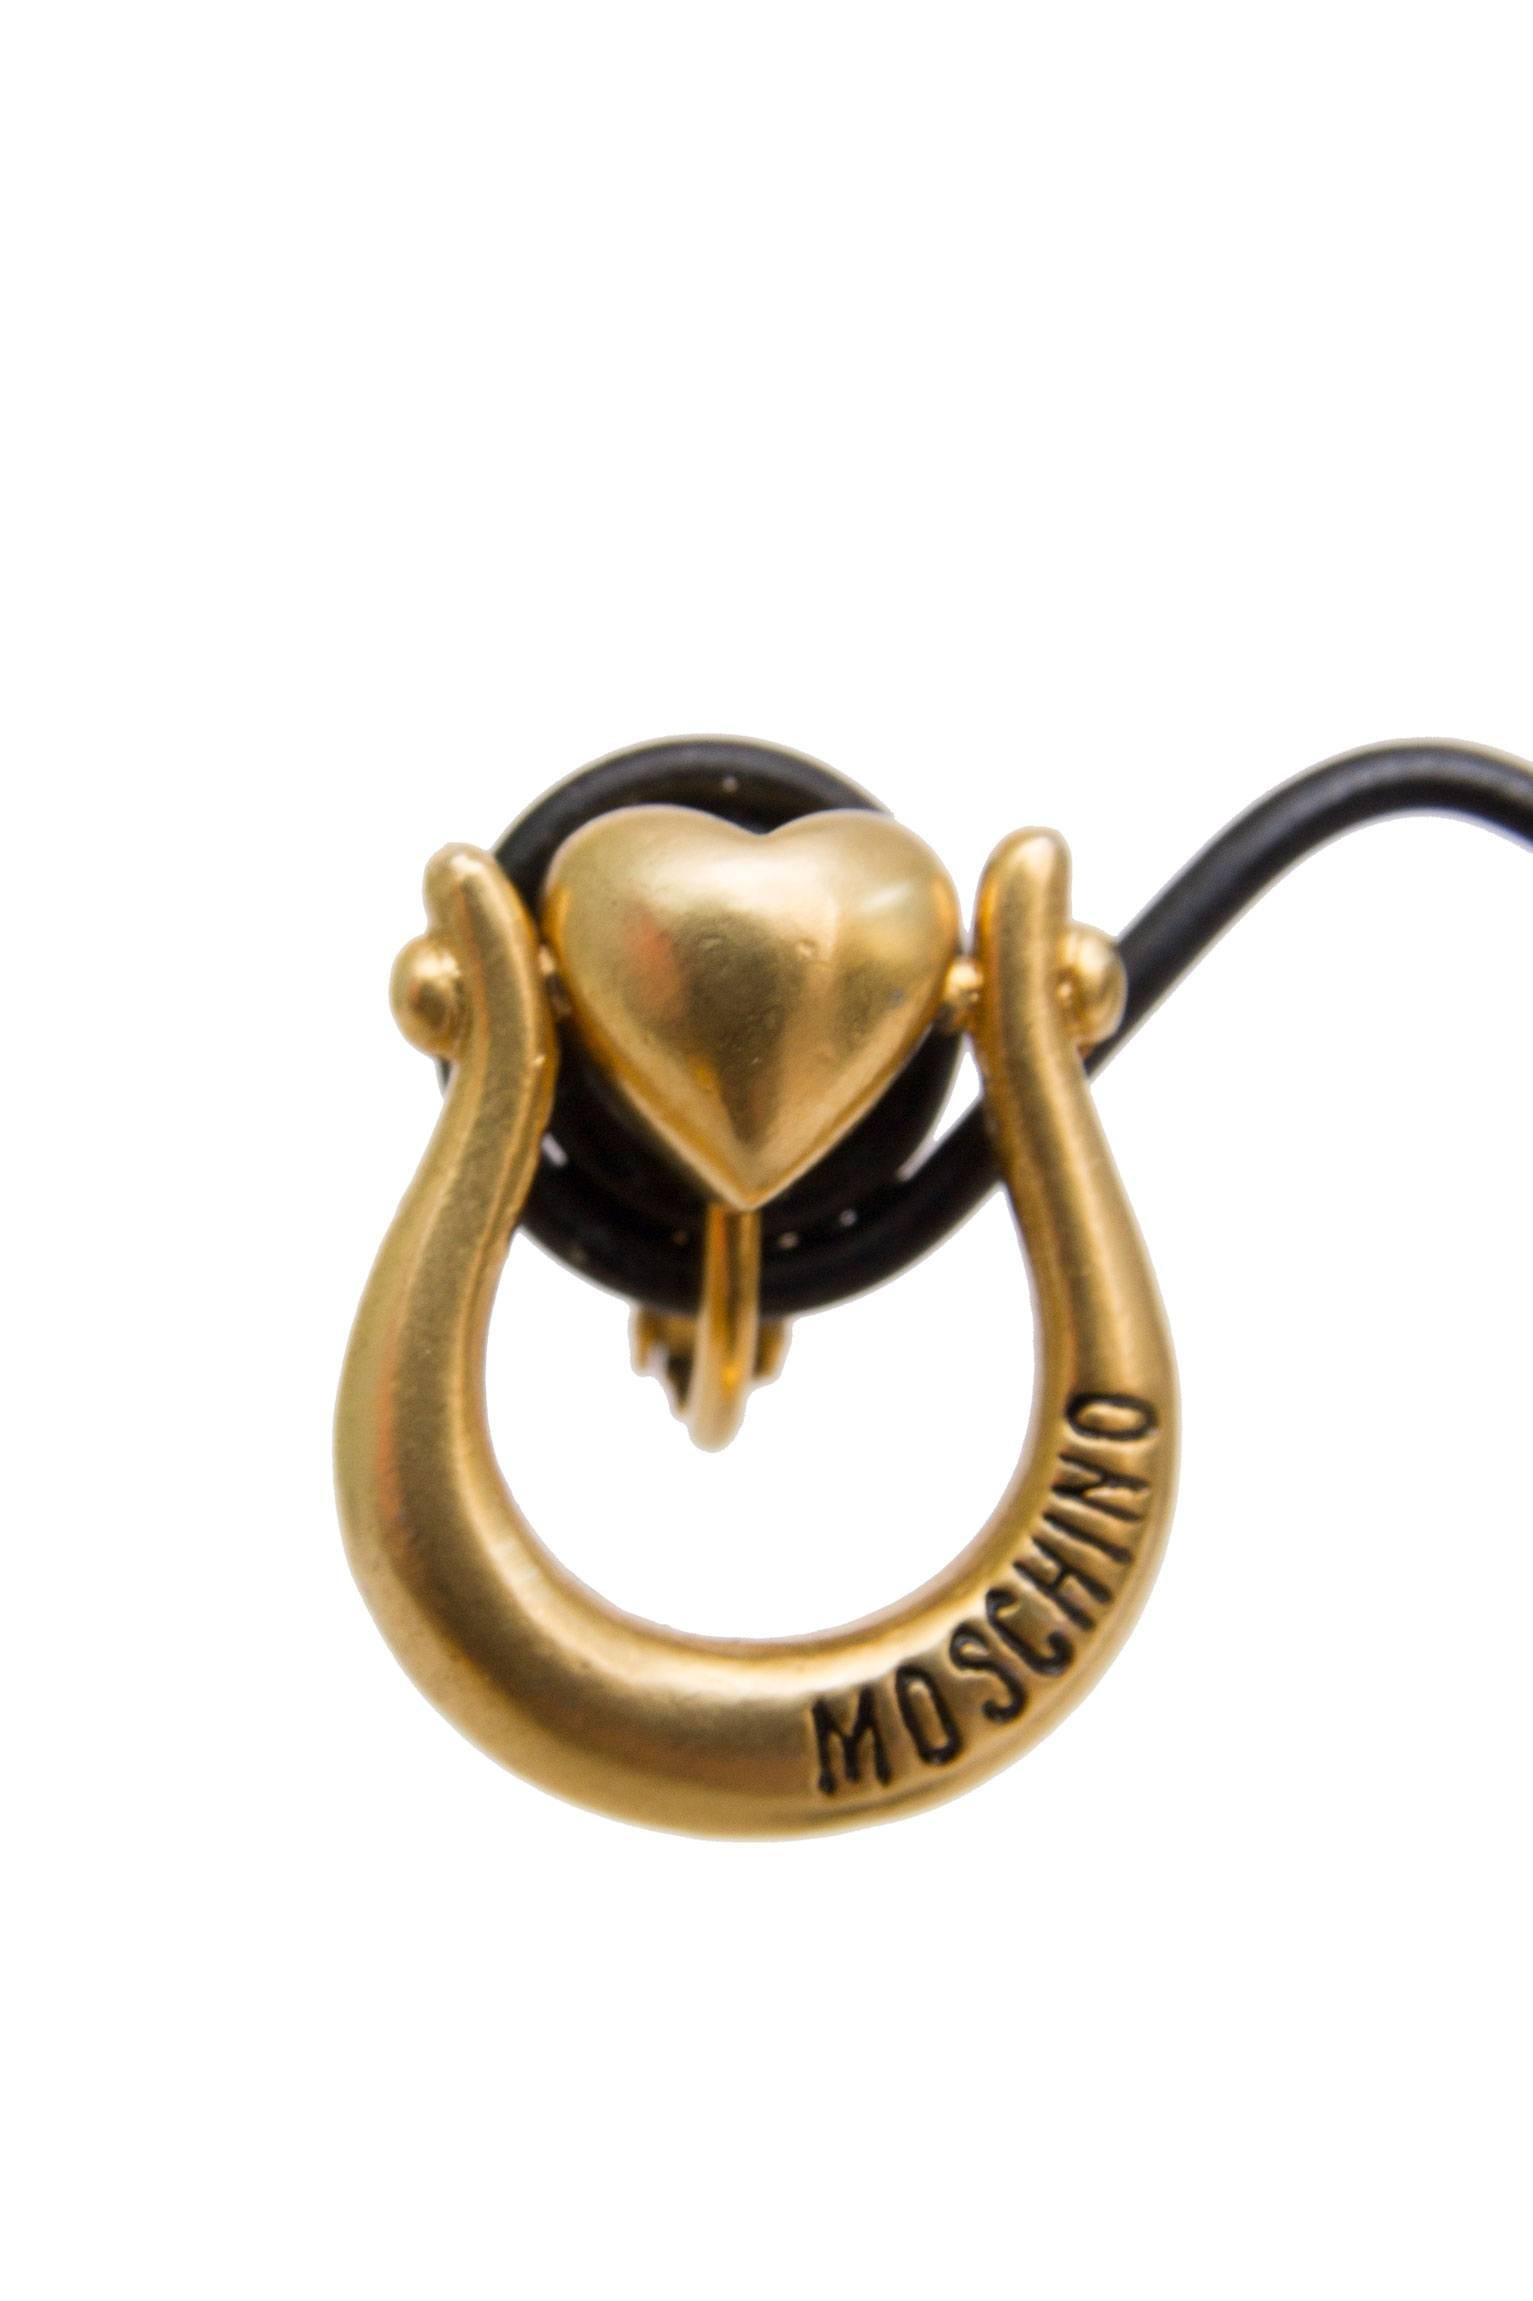 A fun pair of 1990s Moschino clip on earrings that consist of a delicate heart surrounded by what appears to be a small horseshoe. Both earrings are stamped with 'Moschino' in black lettering on the front. 

